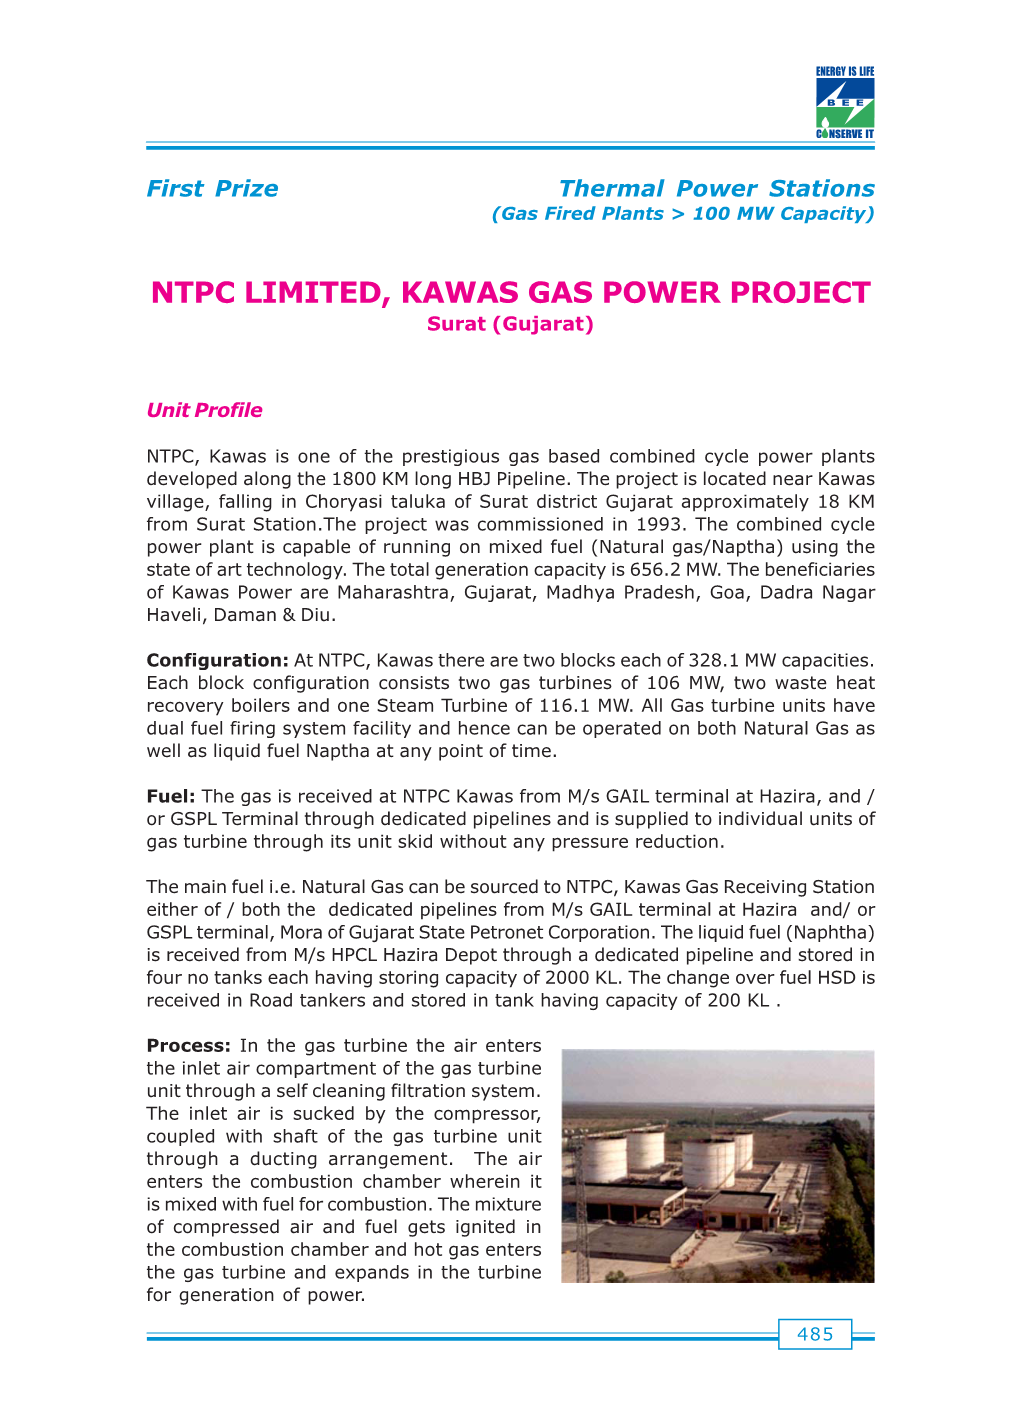 NTPC Limited, Kawas Gas Power Project, Surat